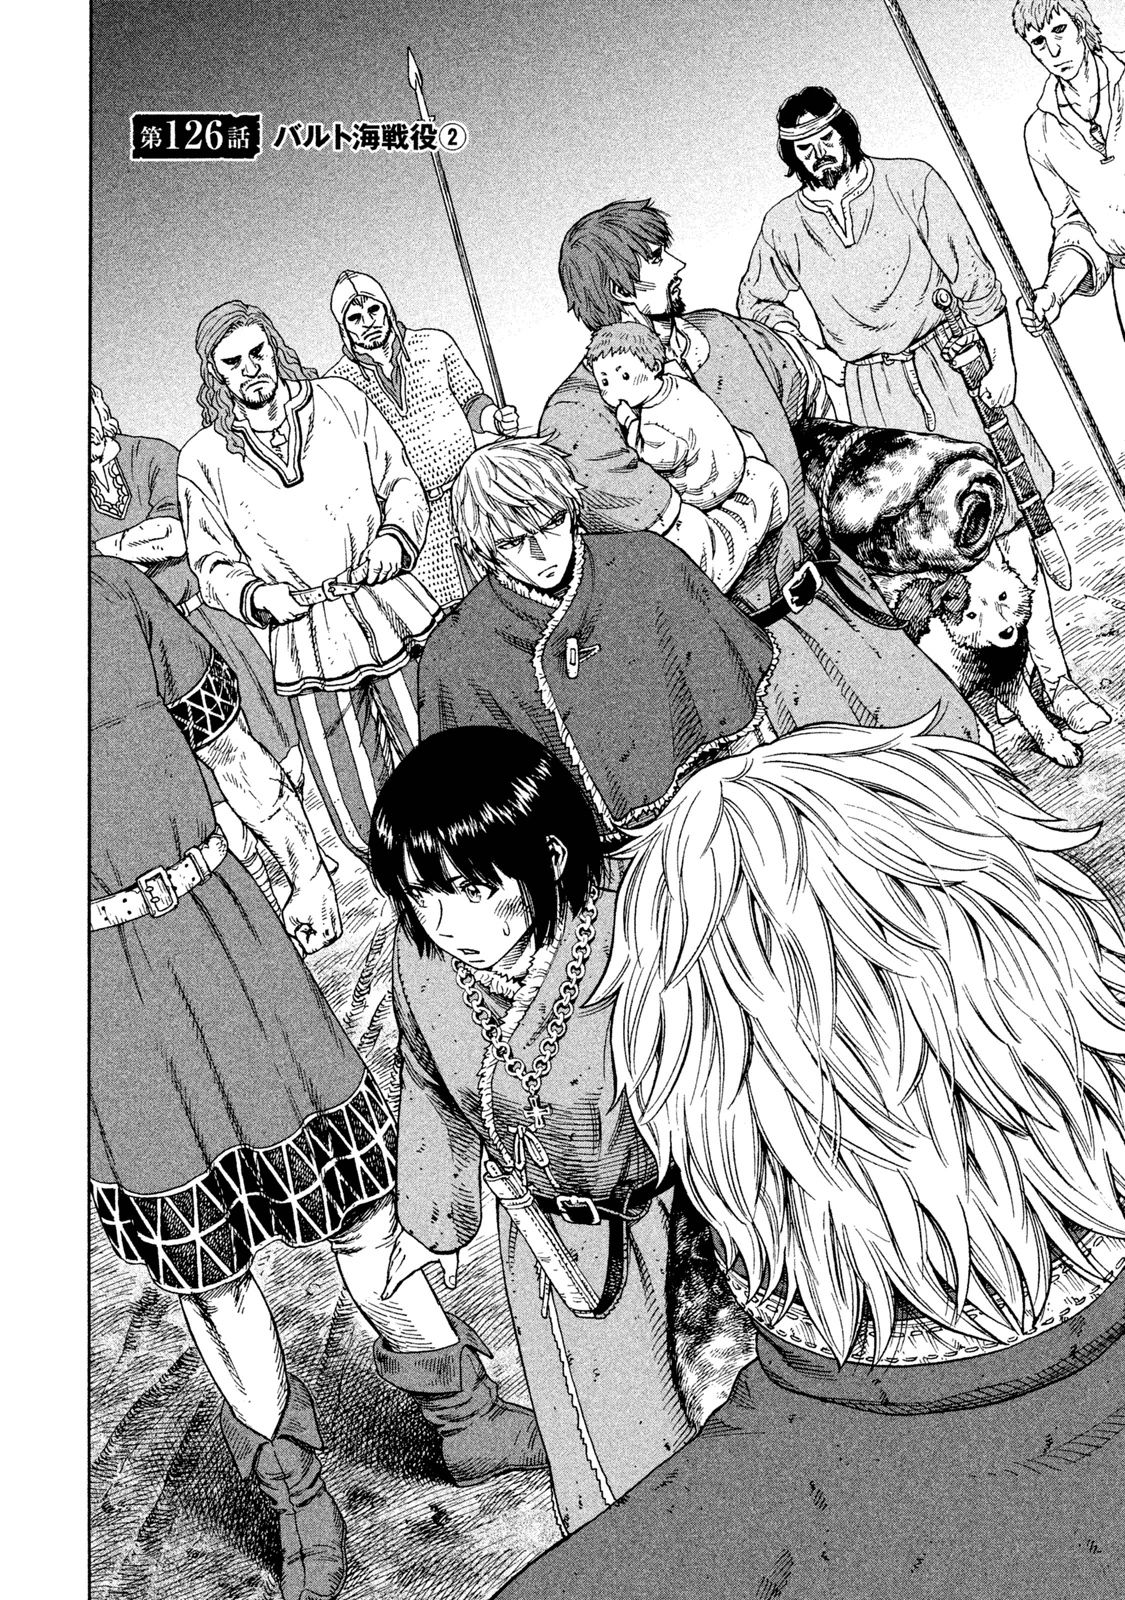 Chapter 27: The Warriors and the Monk, Vinland Saga Wiki